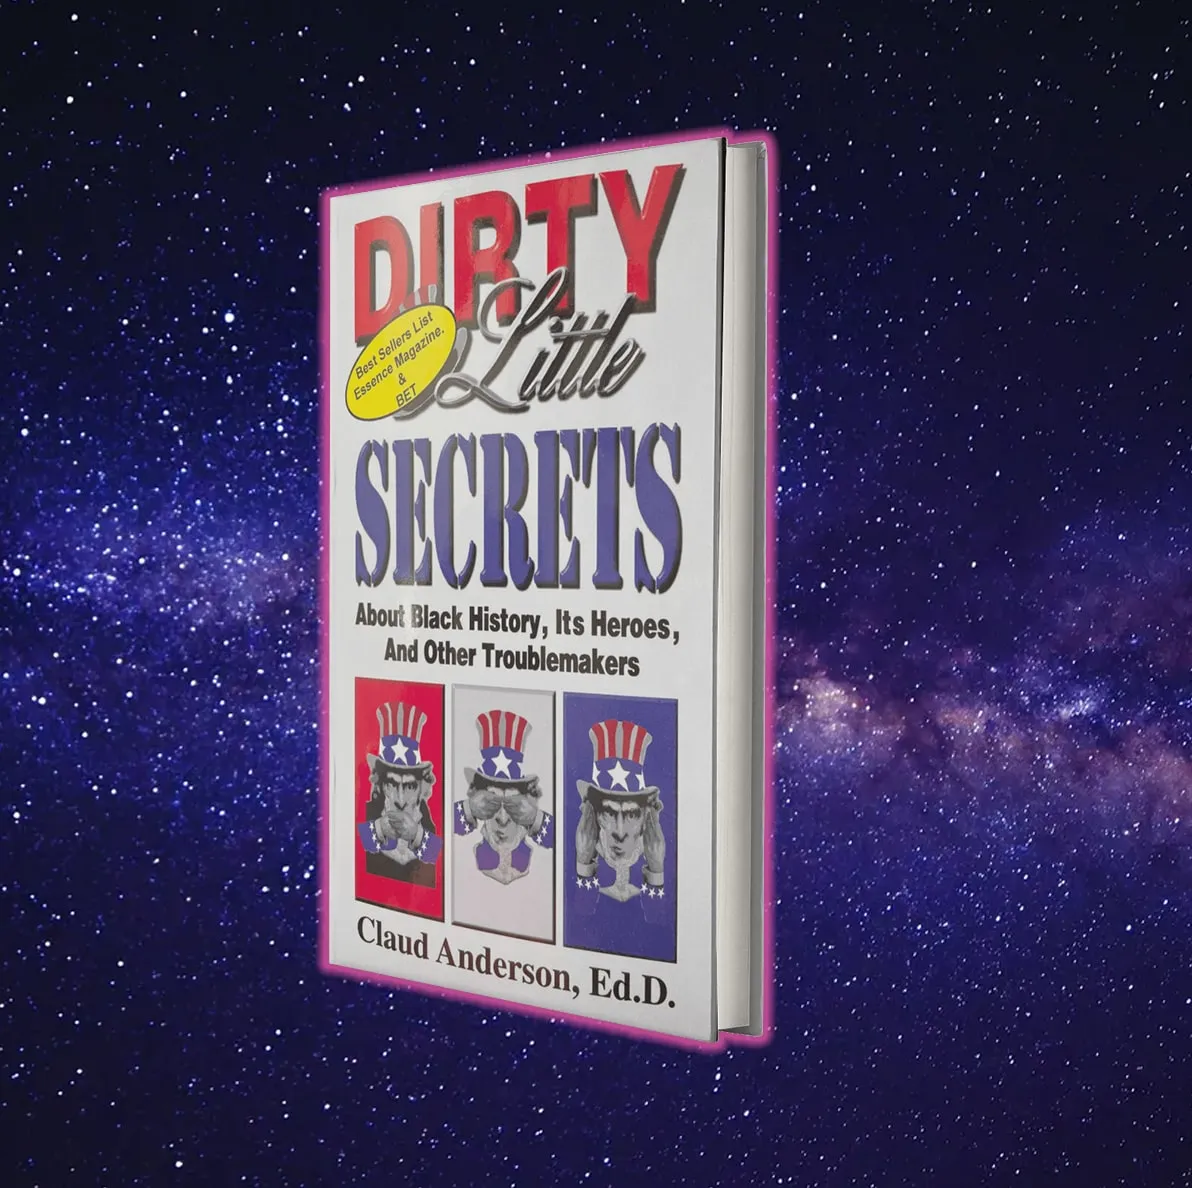 Dirty Little Secrets About Black History, Its Heroes, & Other Troublemakers by Claud Anderson, Ed.D.